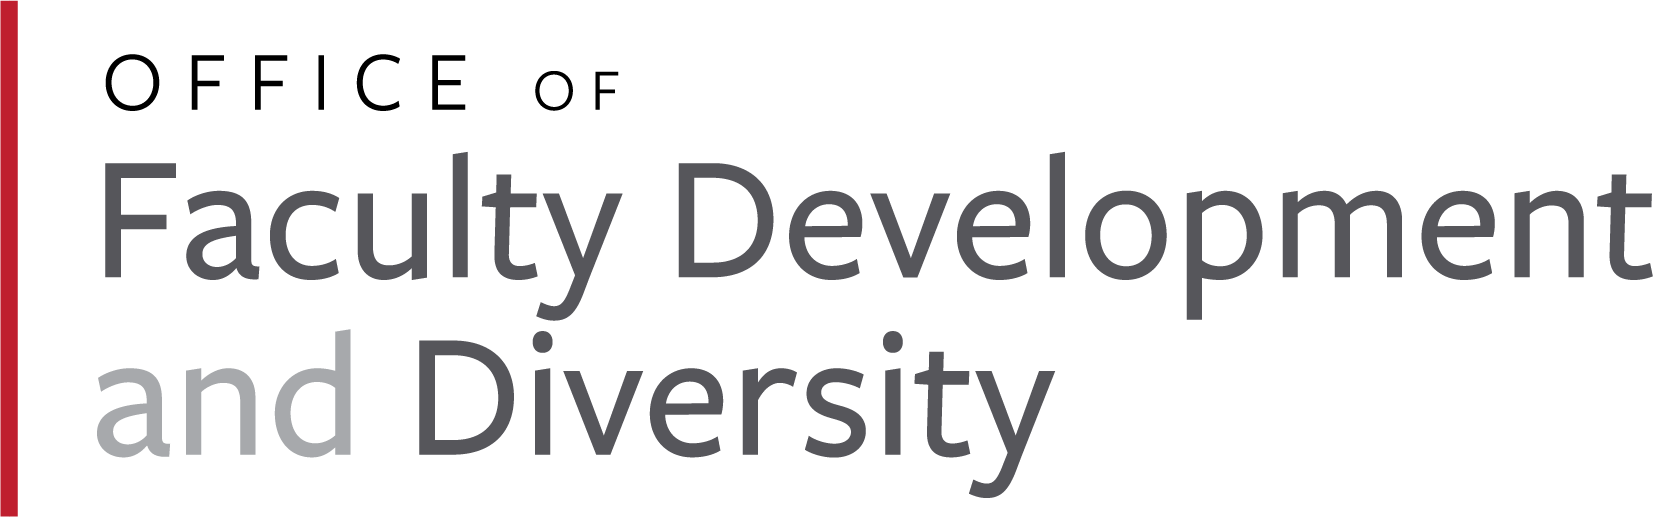 Office of Faculty Development and Diversity